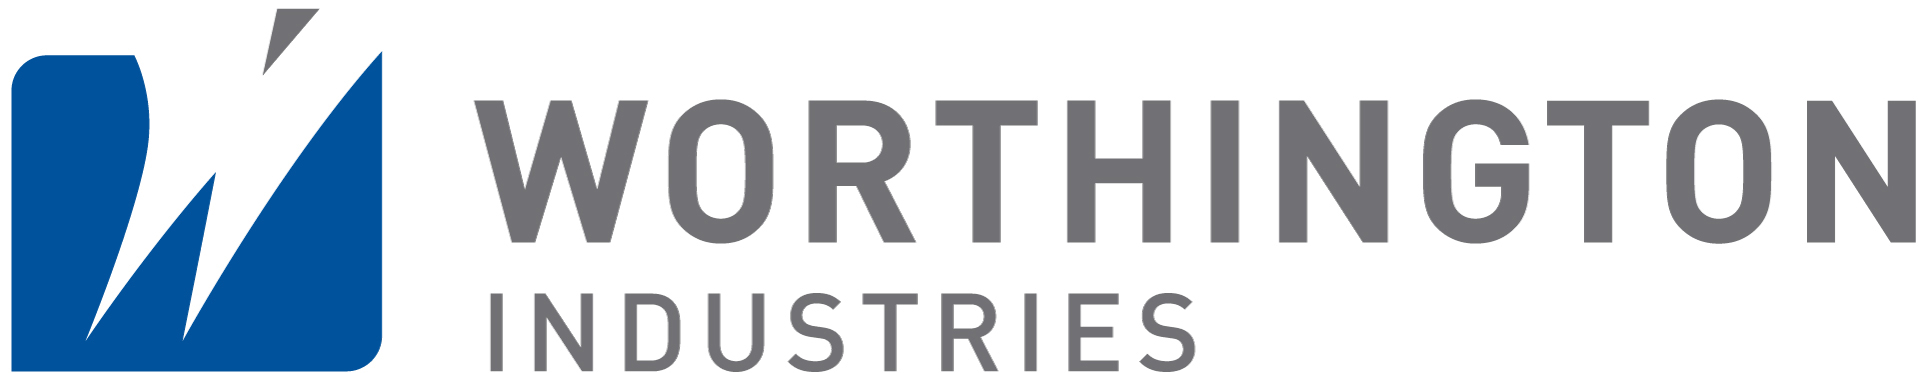 Worthington Industries is a leading diversified metals manufacturing company based in Columbus, Ohio.